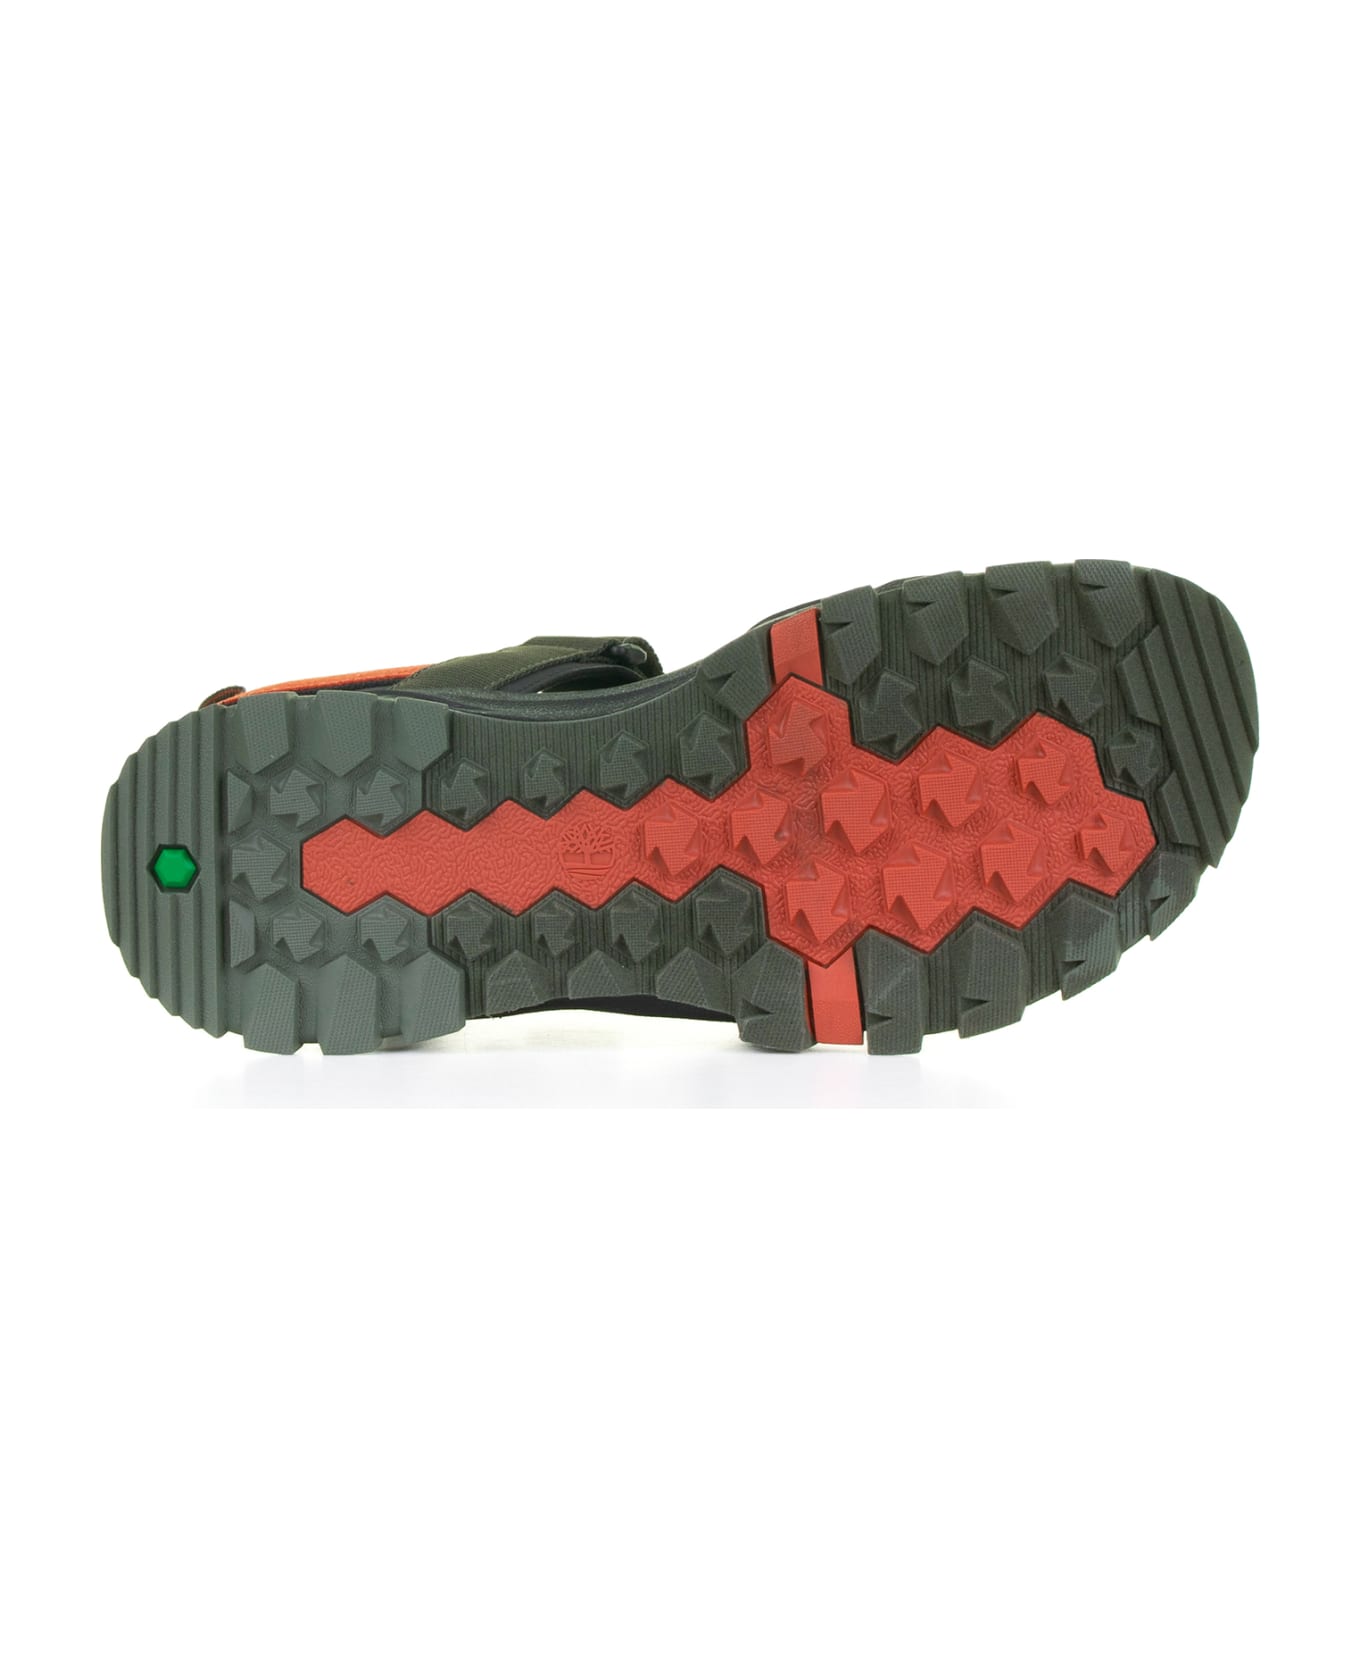 Timberland Sandals With Adjustable Velcro Straps - LEAF GREEN その他各種シューズ